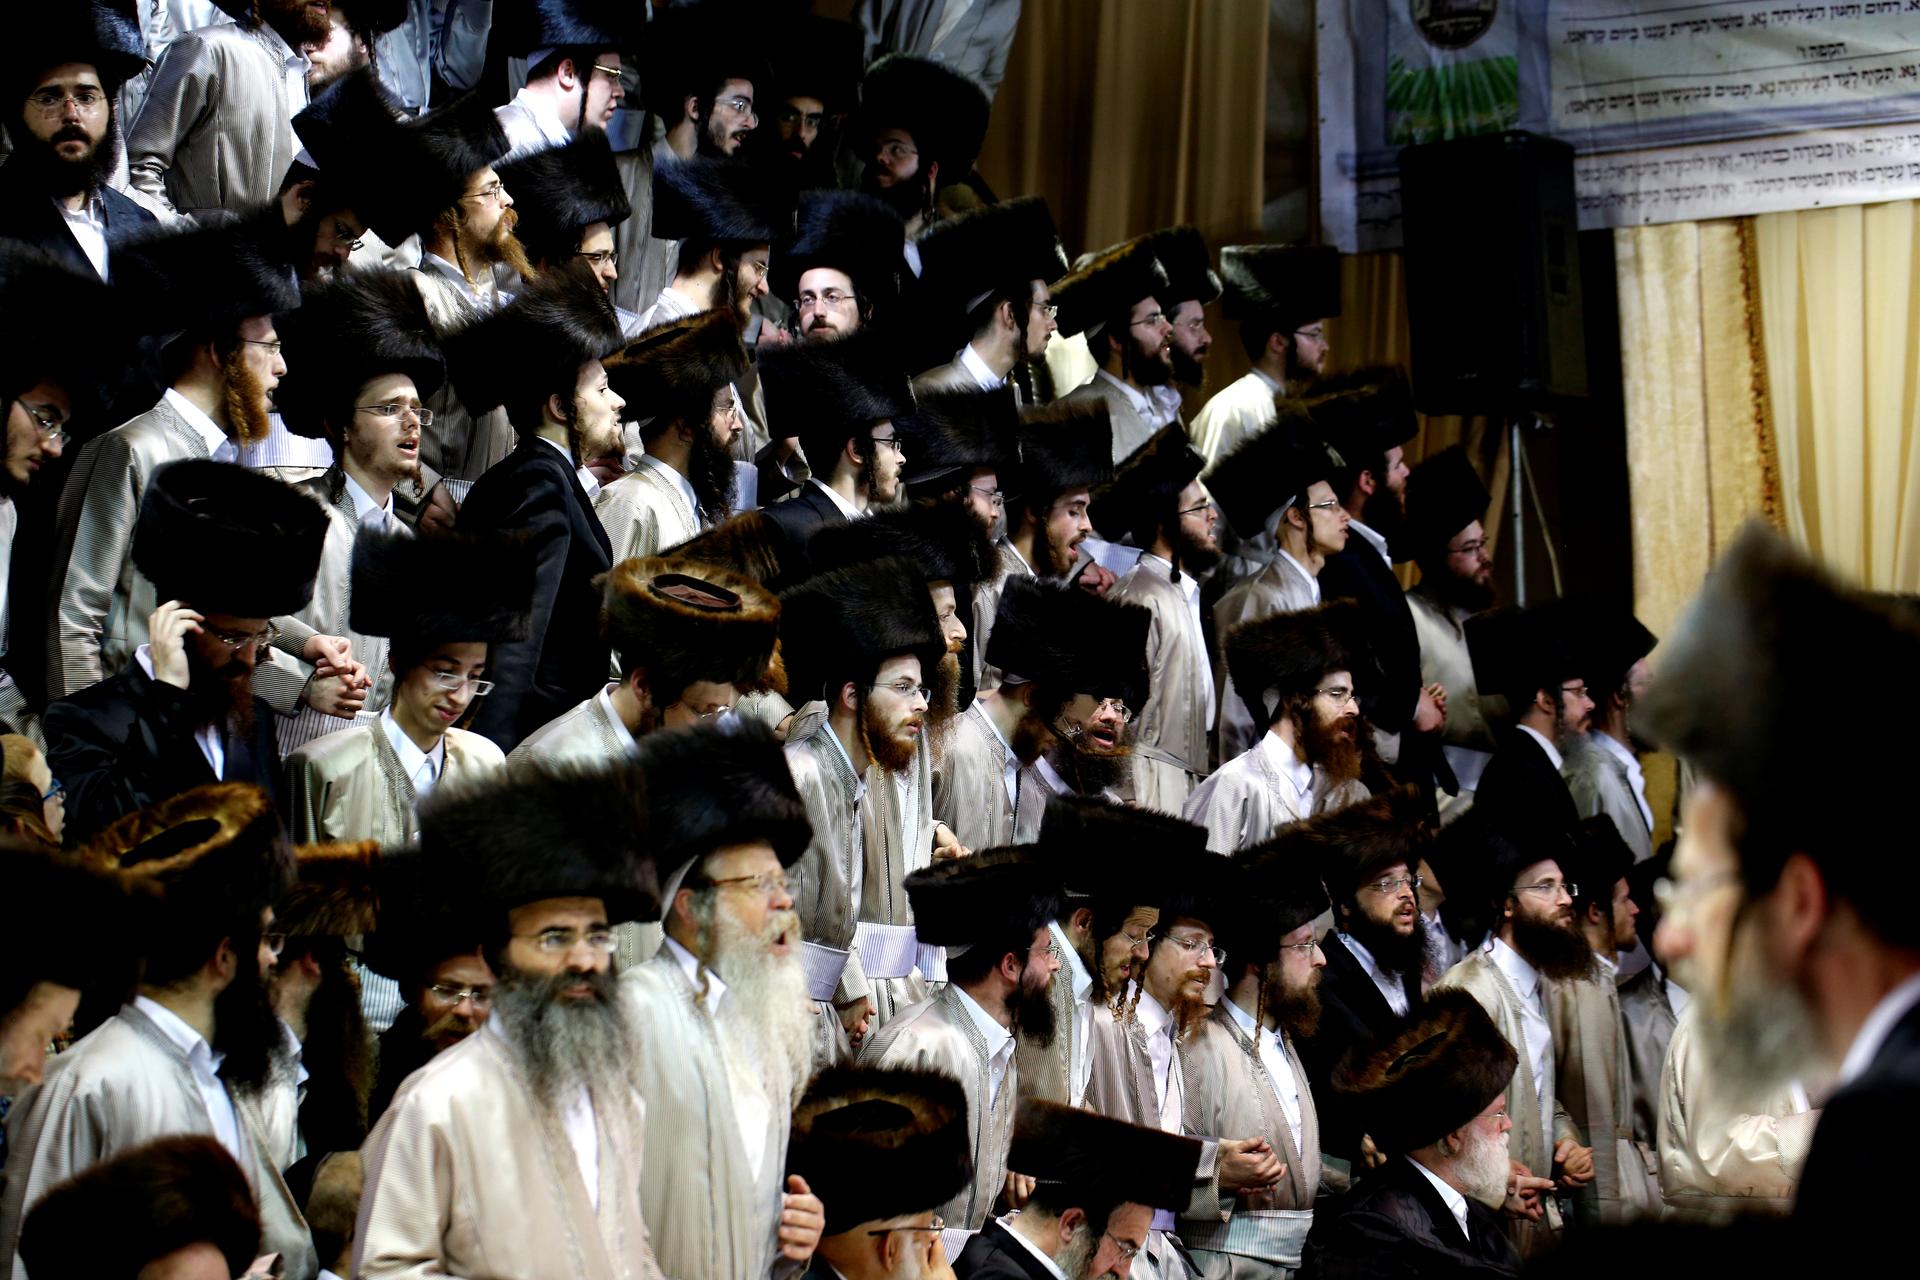 a large group of ultra-orthodox men dressed in traditional garb